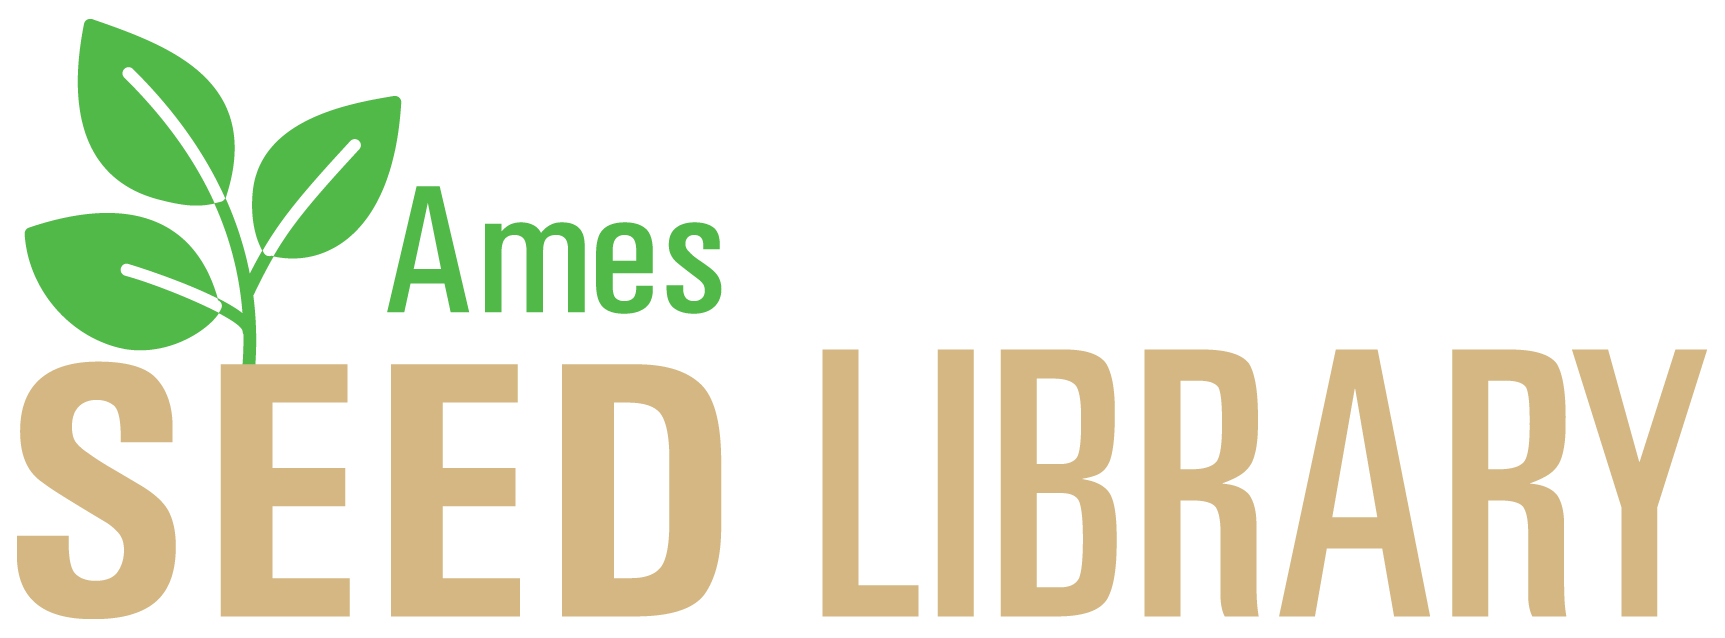 Ames Seed Library logo